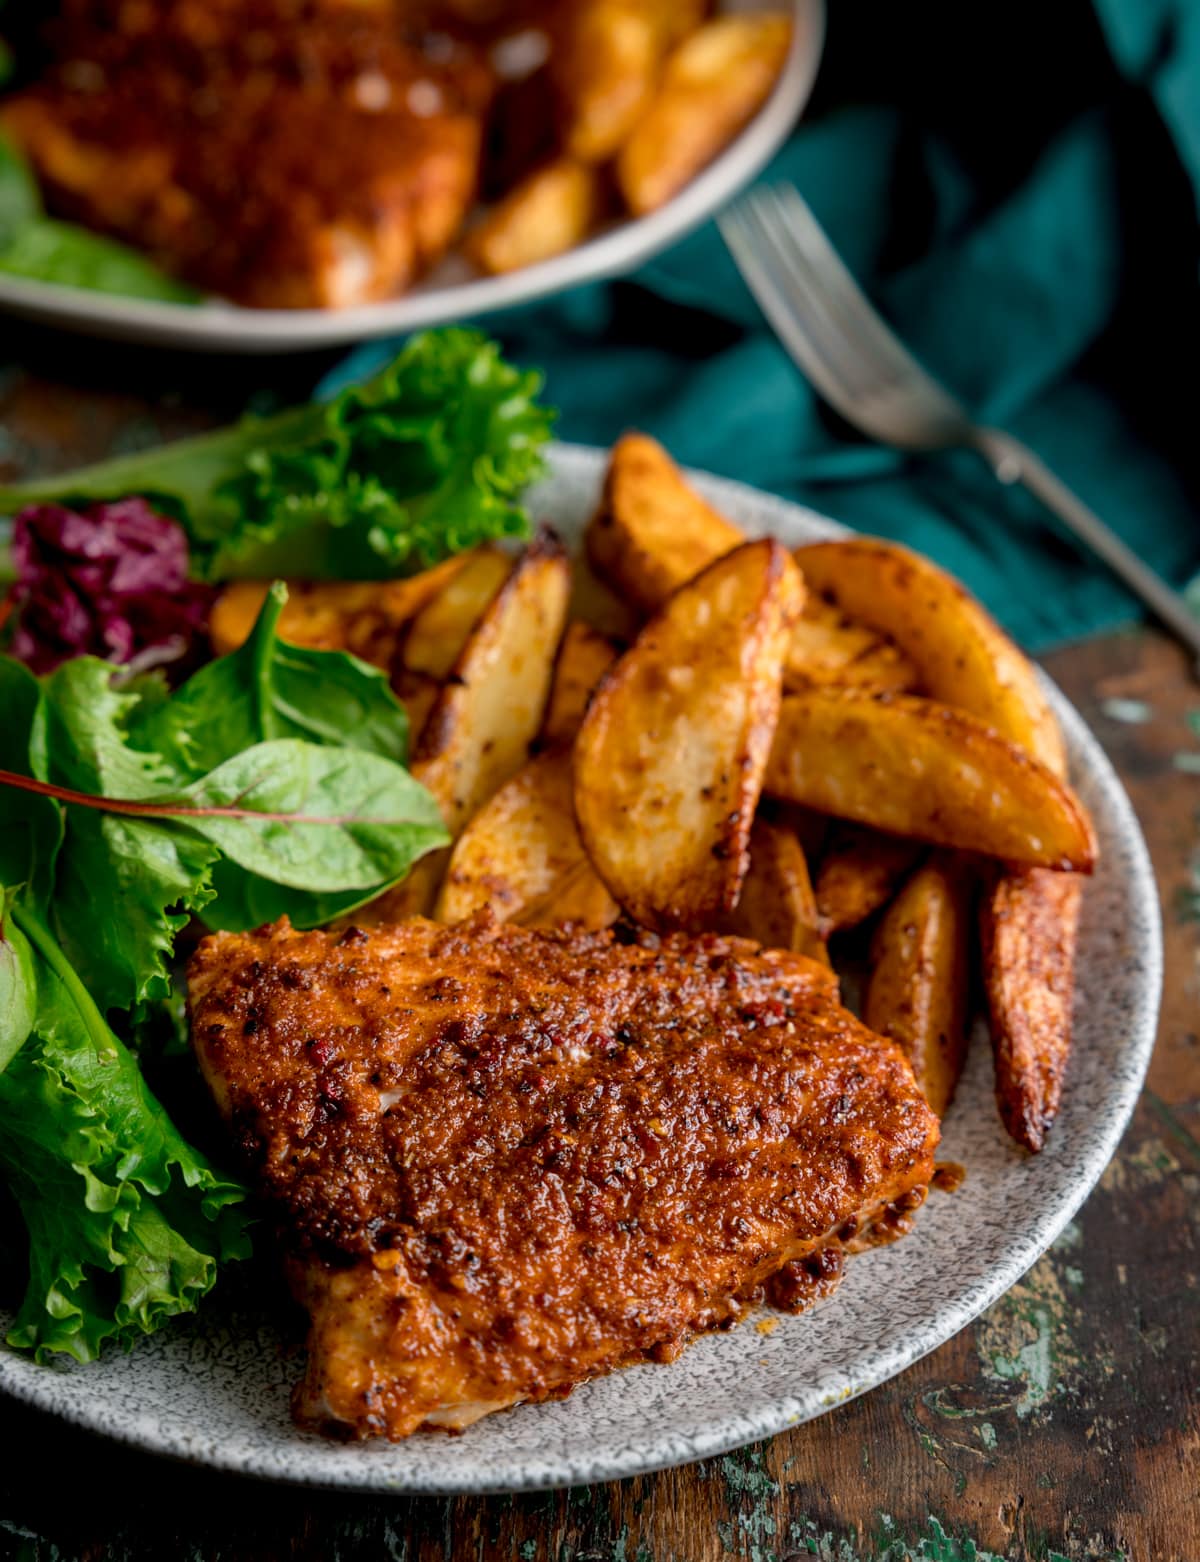 An image of cajun cod, smoky potato wedges and some green salad leaves arranged on a grey plate. This is on a brown surface. In the top left of the background is another plate identical to the main dish, on the top right is a dark green napkin with a silver fork resting on it.